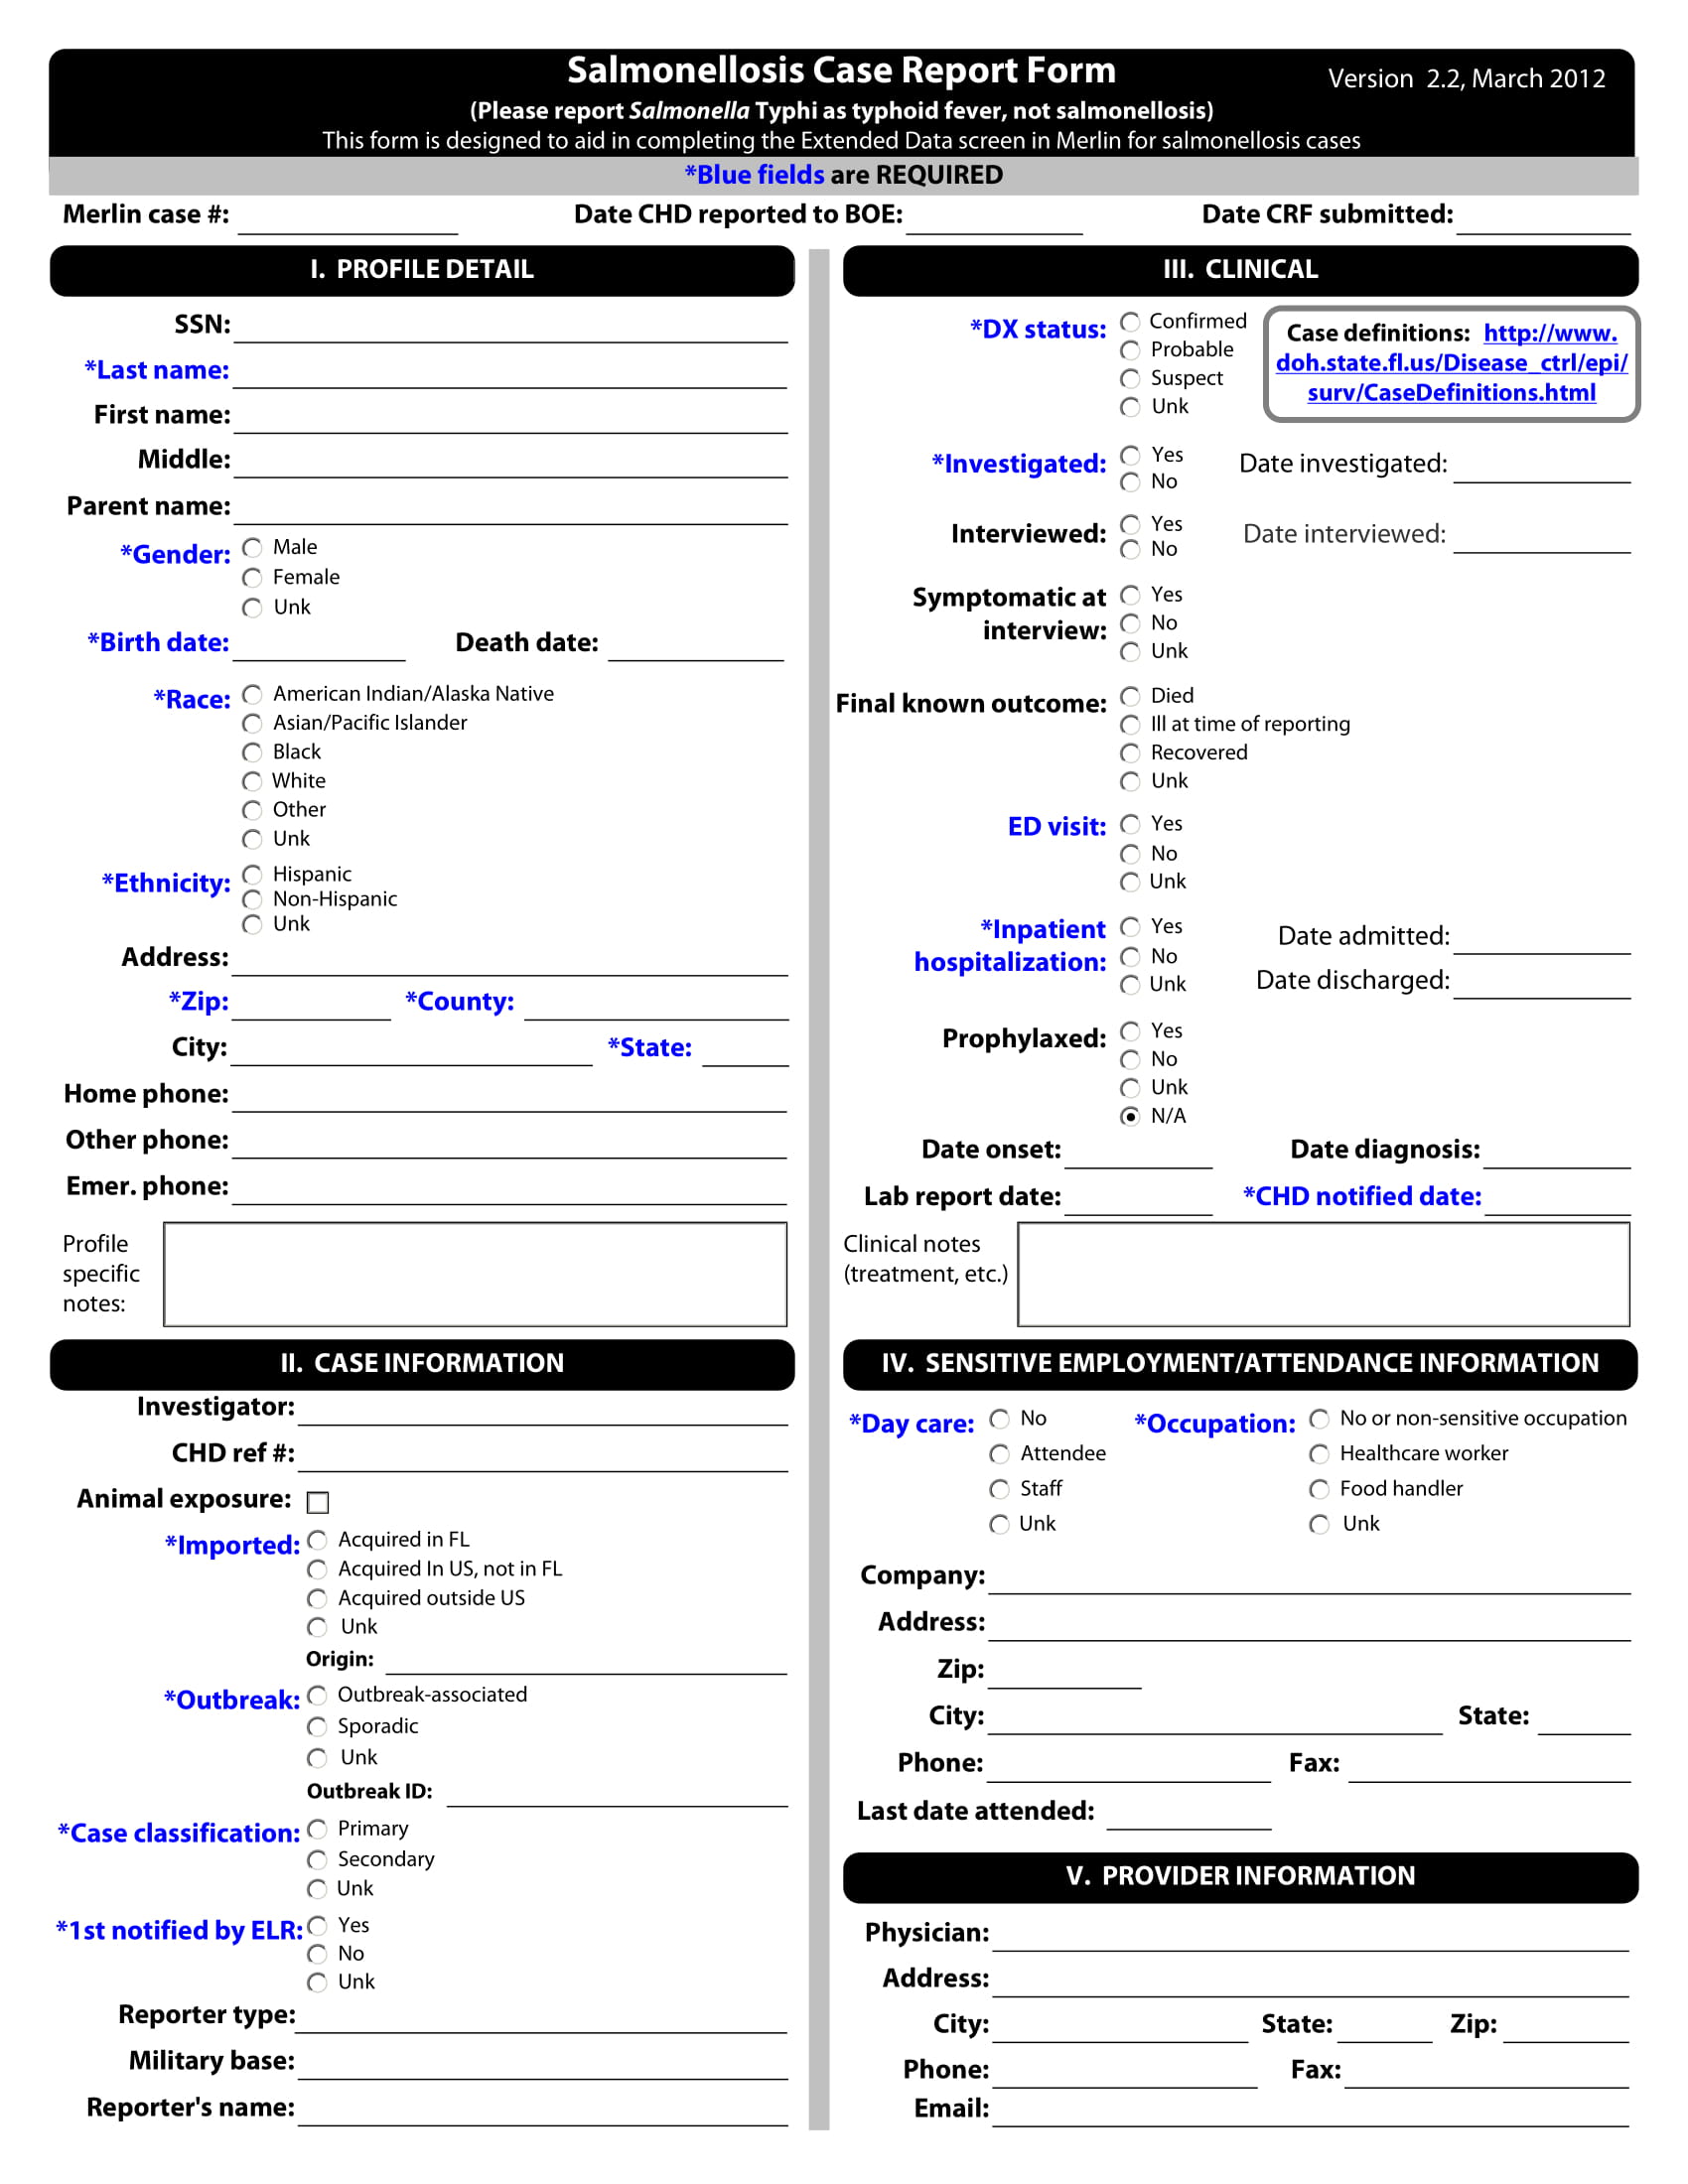 salmonellosis case report form 1